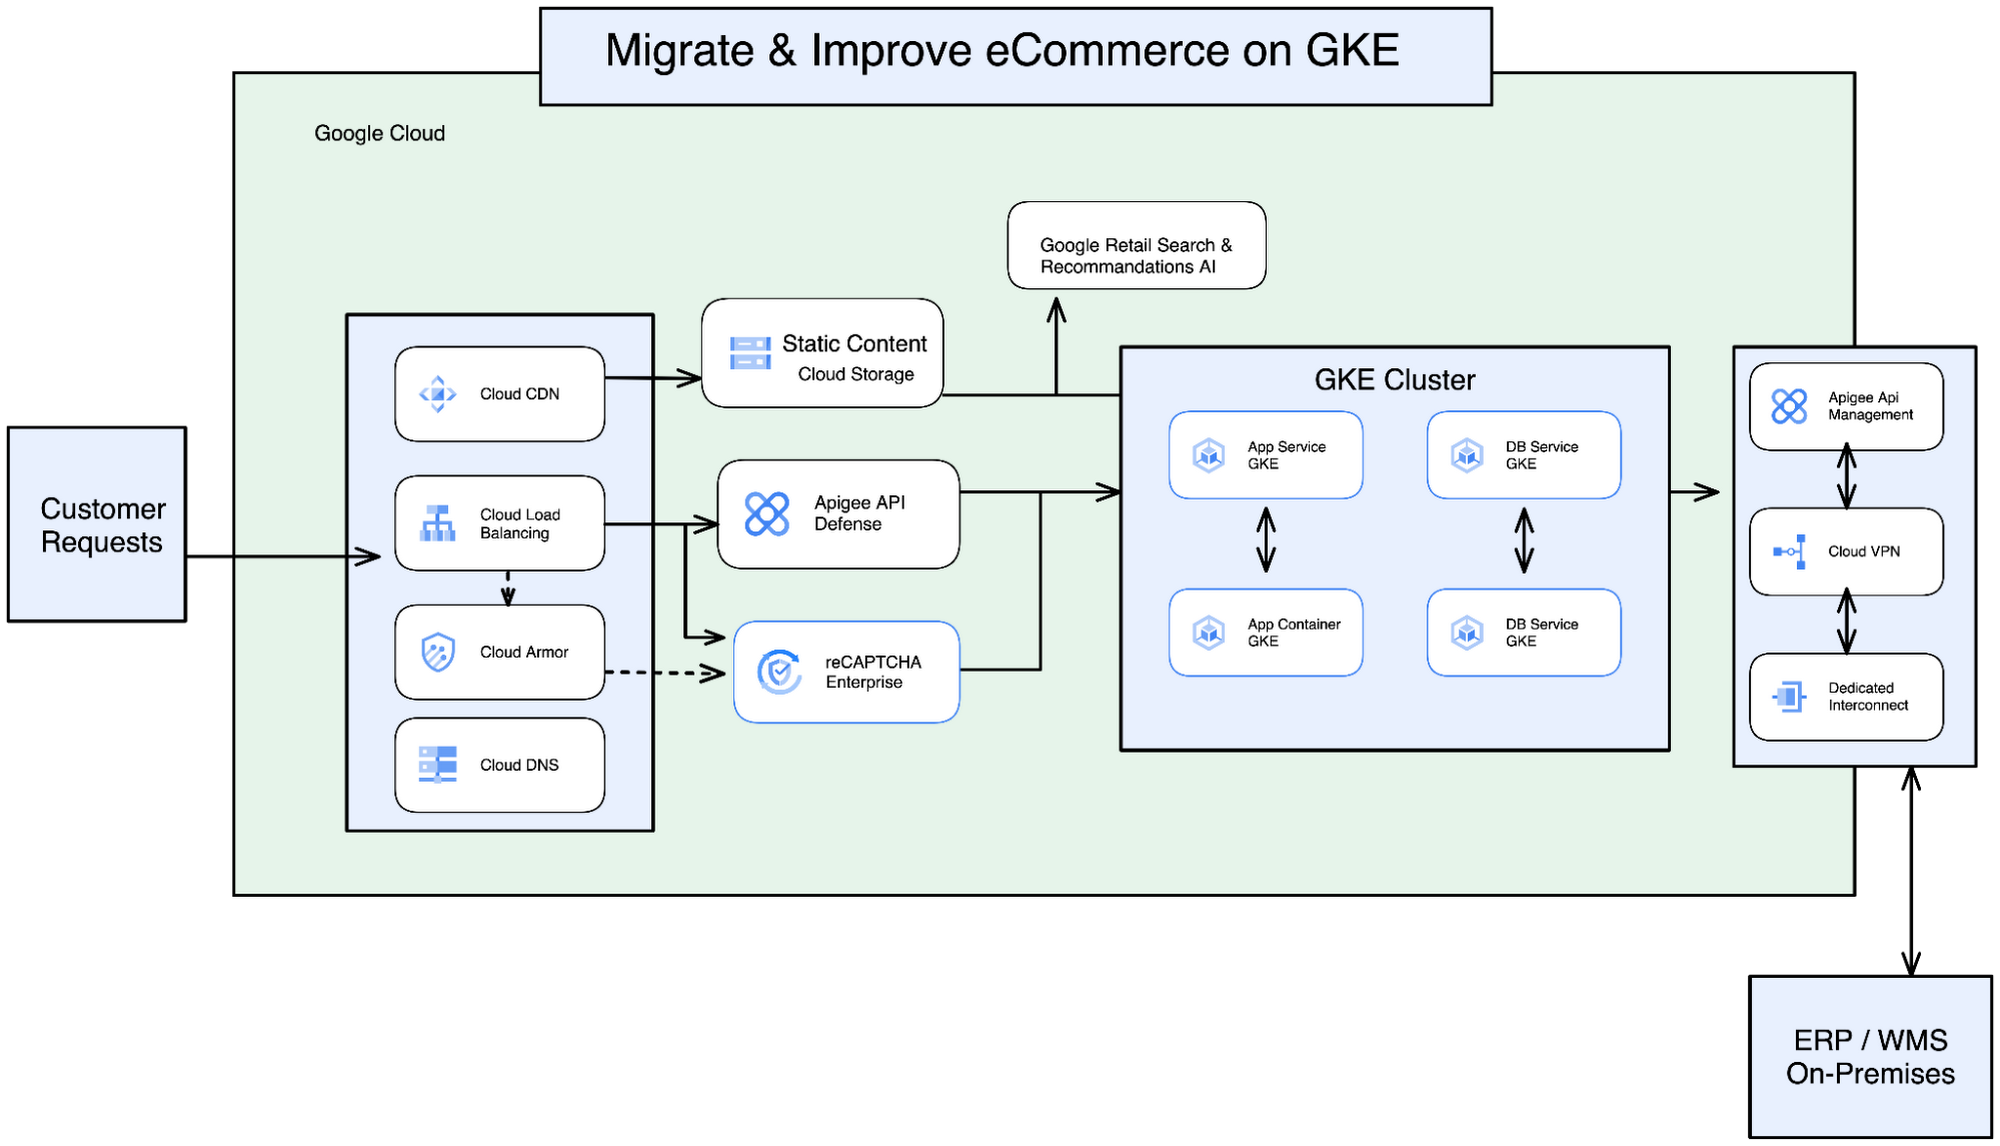 migrate and improve eCommerce on GKE